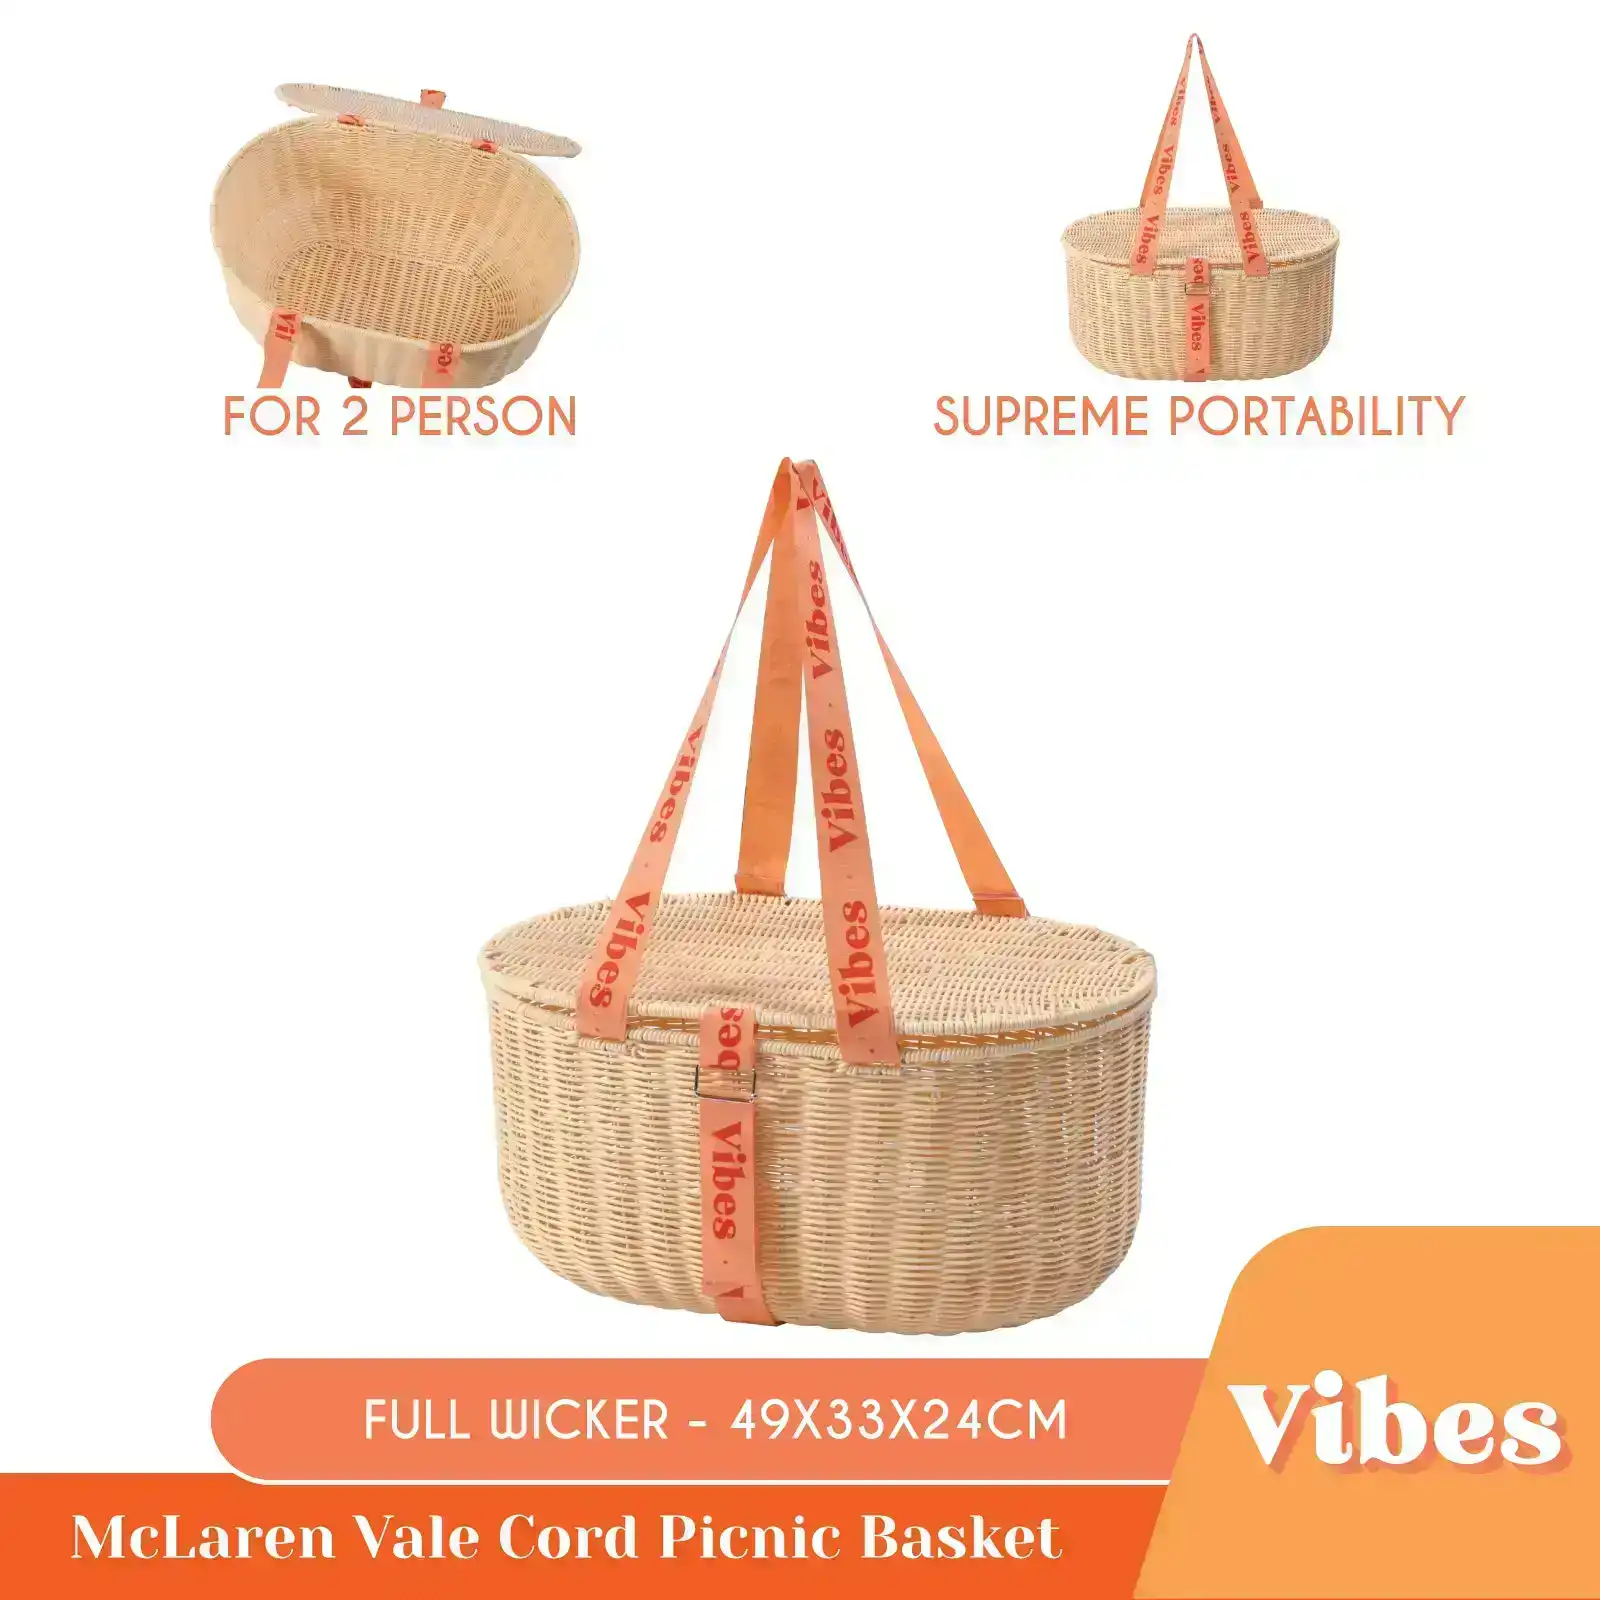 Vibes McLaren Vale 2 Person Wicker Cord Picnic Basket Tanned 49x33x24cm